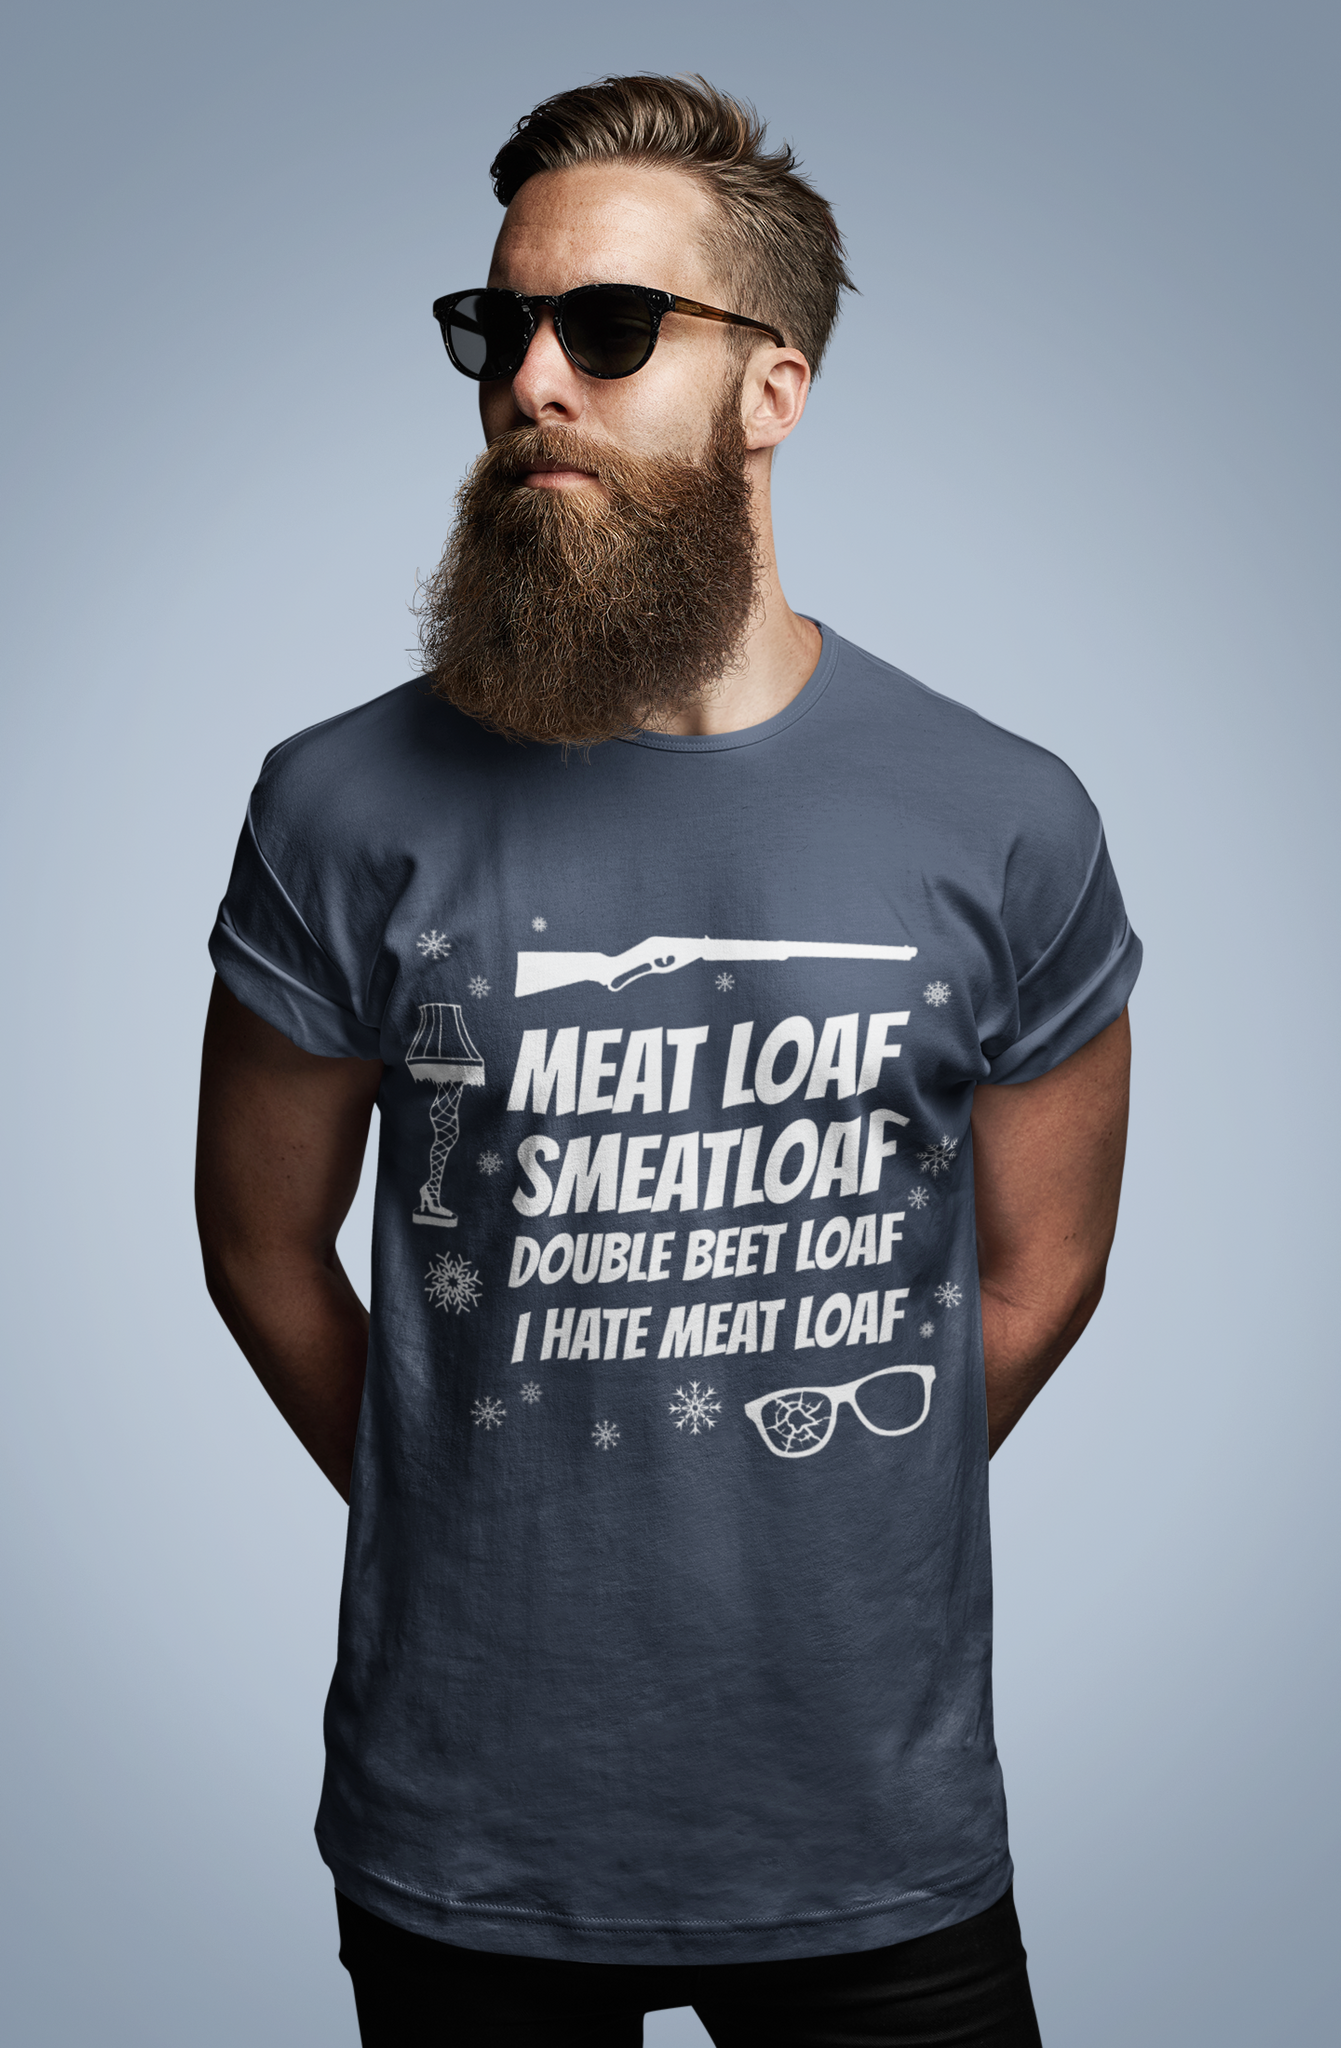 A Christmas Story T Shirt, Randy T Shirt, Leg Lamp Shirt, Meat Loaf Smeatloaf Double Beet Loaf I Hate Meet Loaf Tshirt, Christmas Gifts